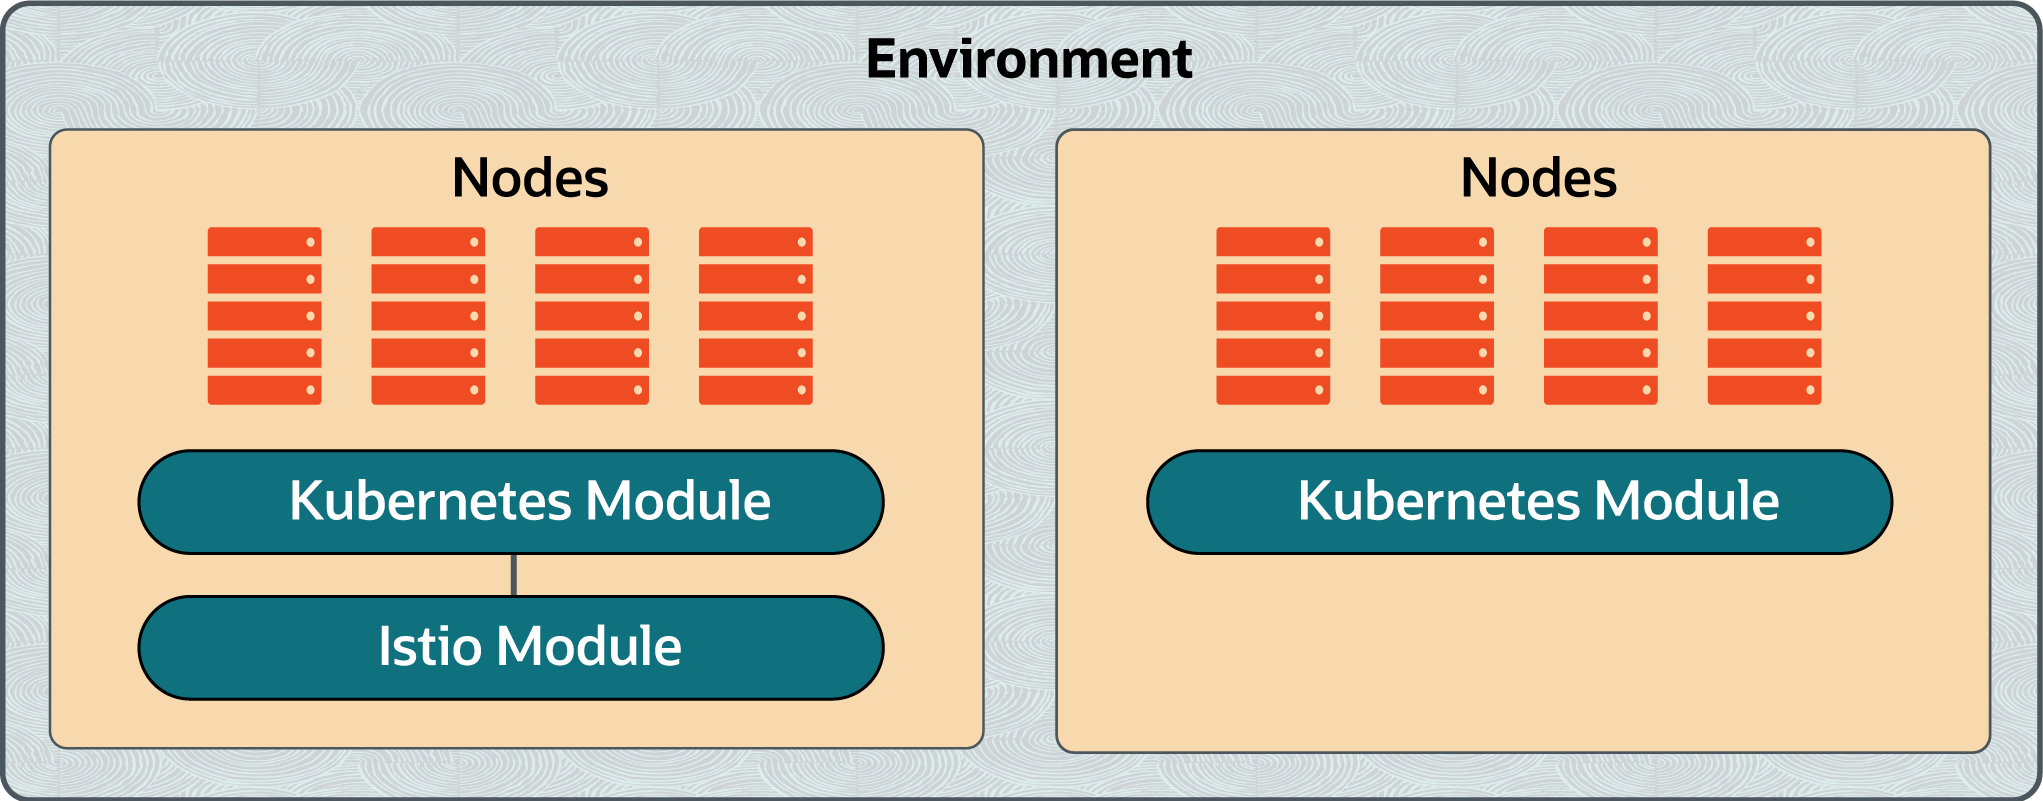 This figure shows an environment, which contains two Kubernetes clusters, one of which also has an Istio module deployment.